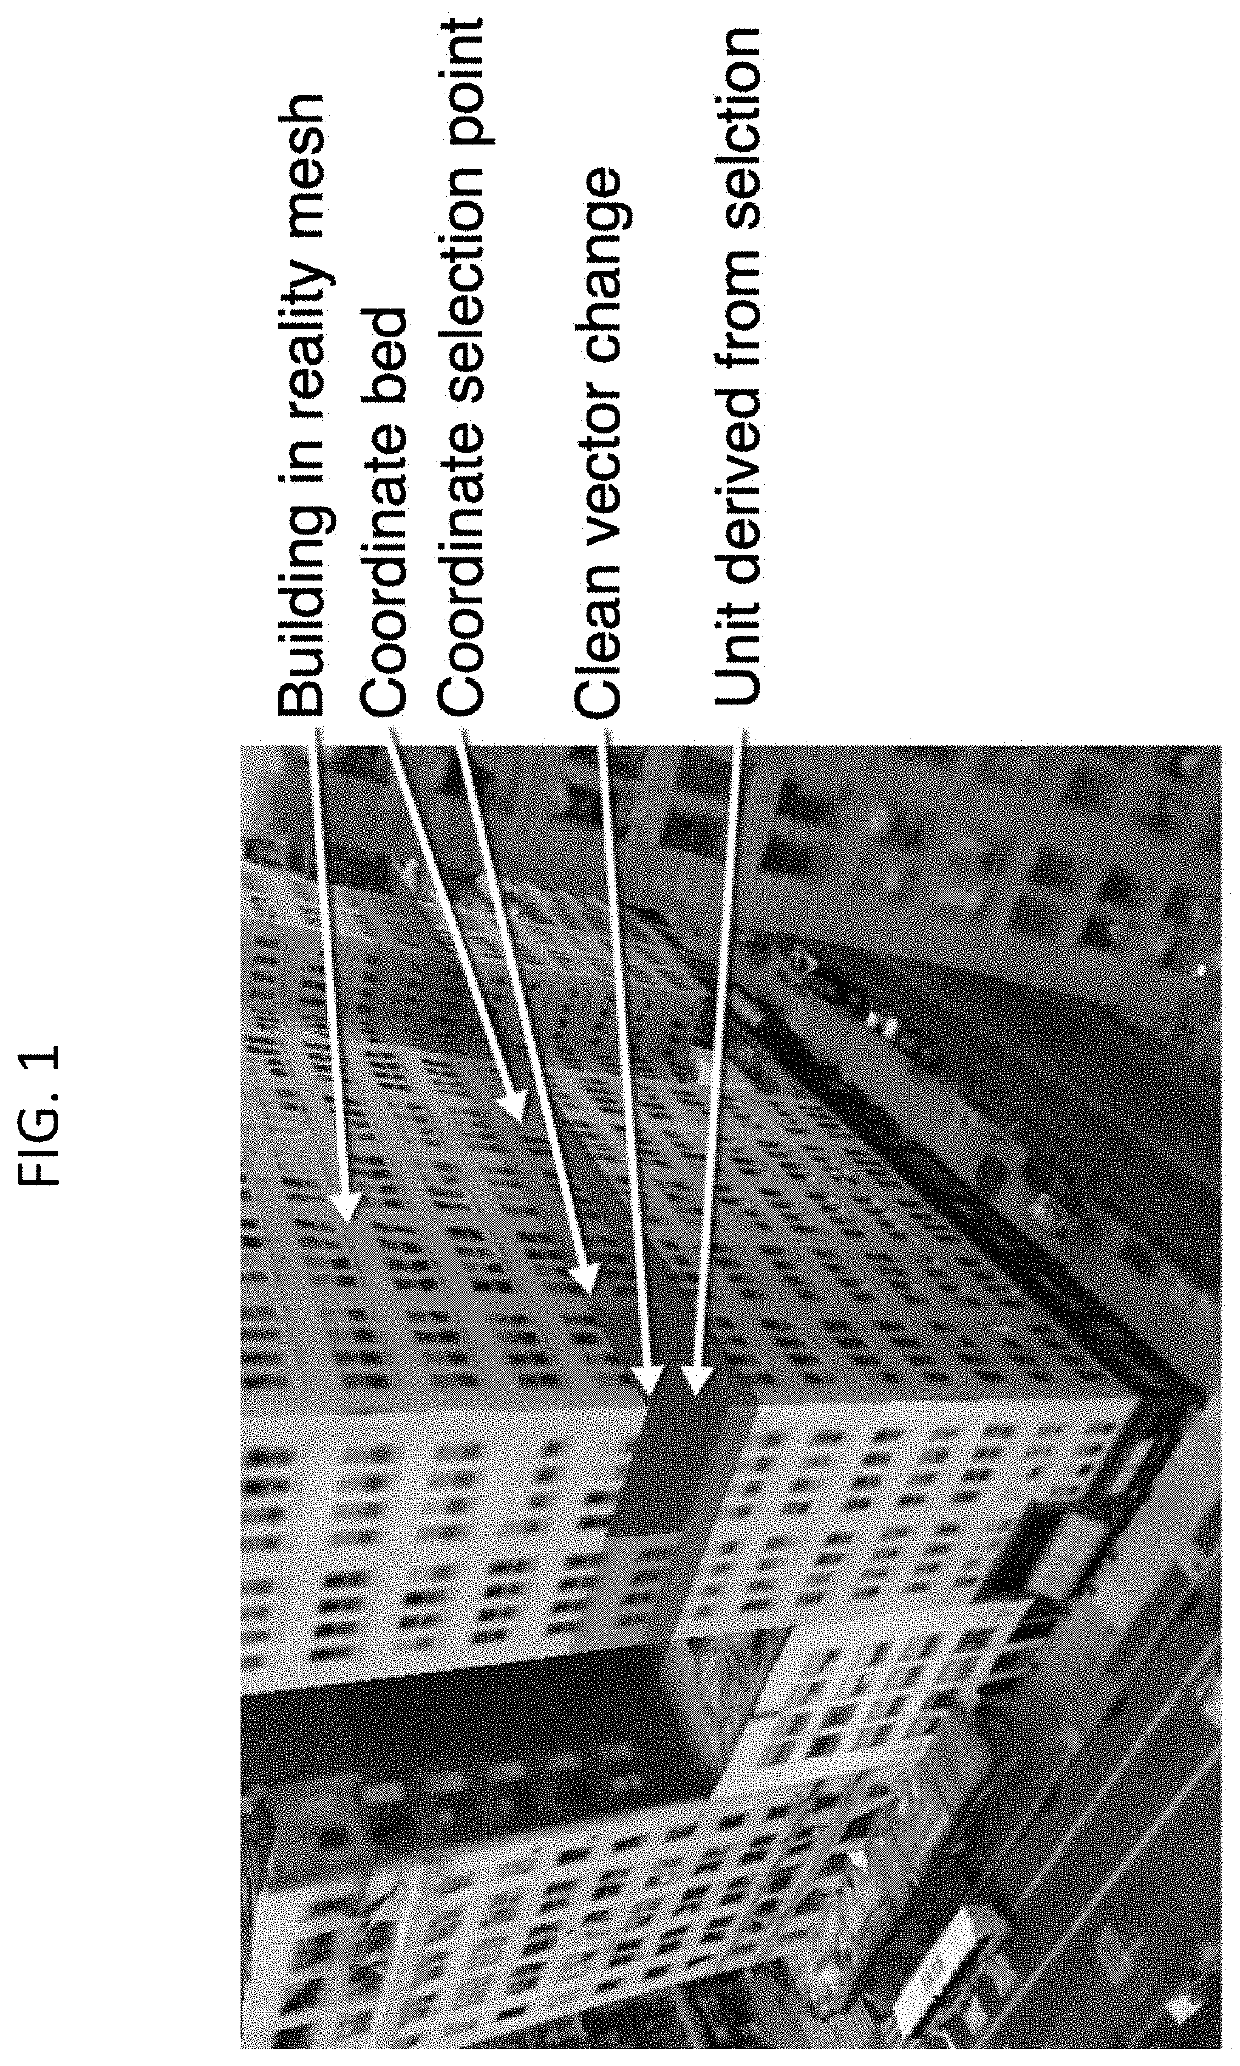 System and Method to Process and Display Information Related to Real Estate by Developing and Presenting a Photogrammetric Reality Mesh